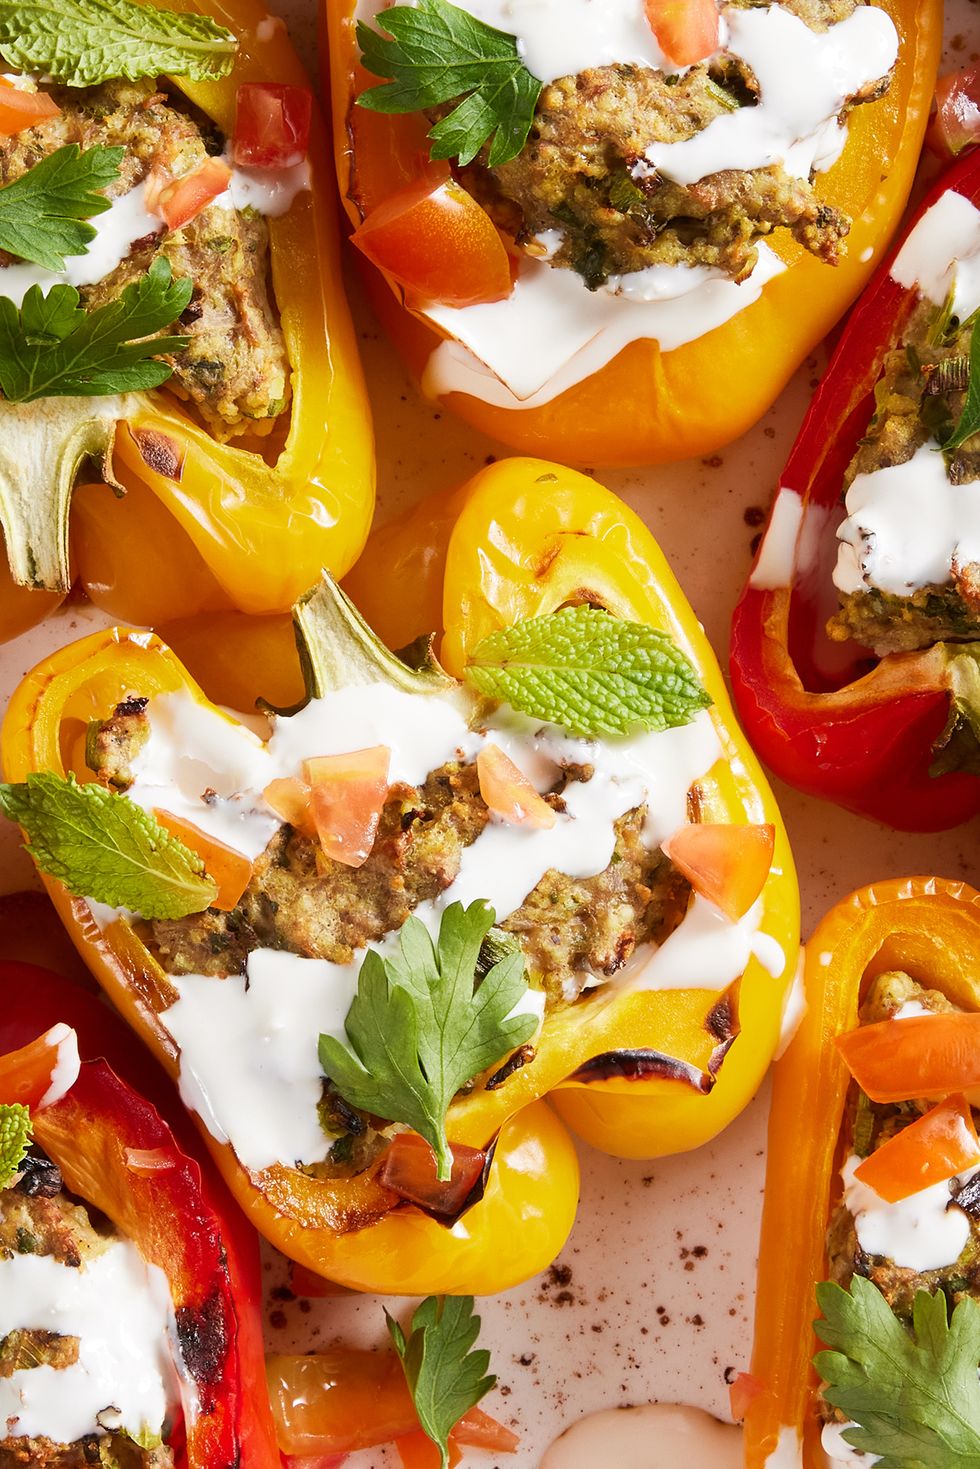 multicolored peppers stuffed with shawarma and drizzled with a cream sauce and mint